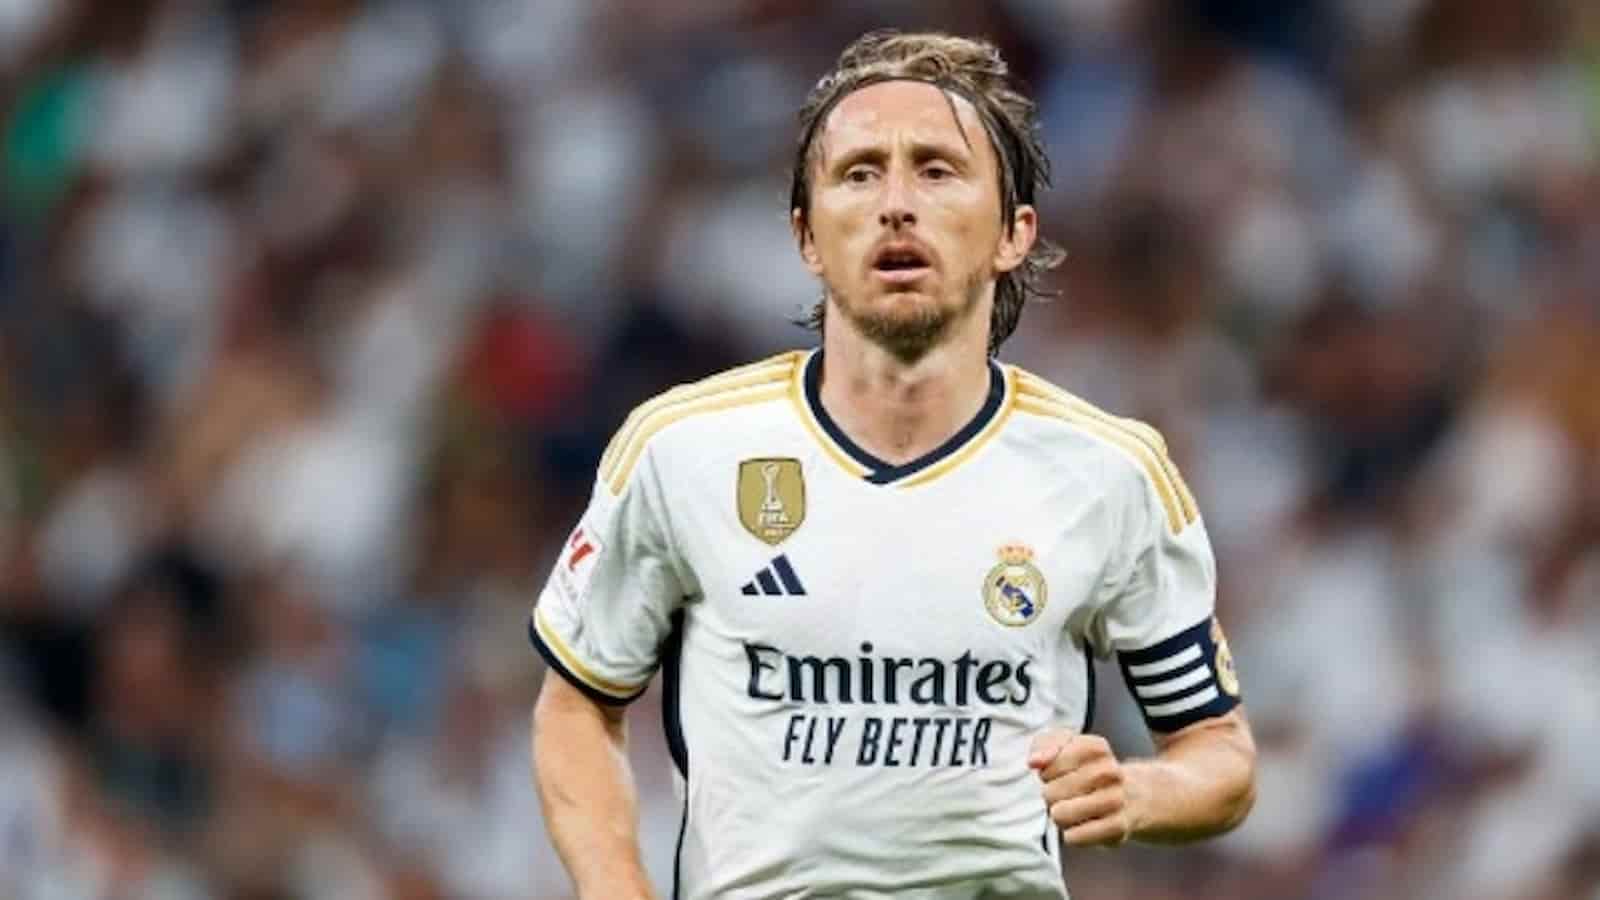 Potential Addition to Real Madrid Coaching Staff Luka Modric Under Consideration by Carlo Ancelotti